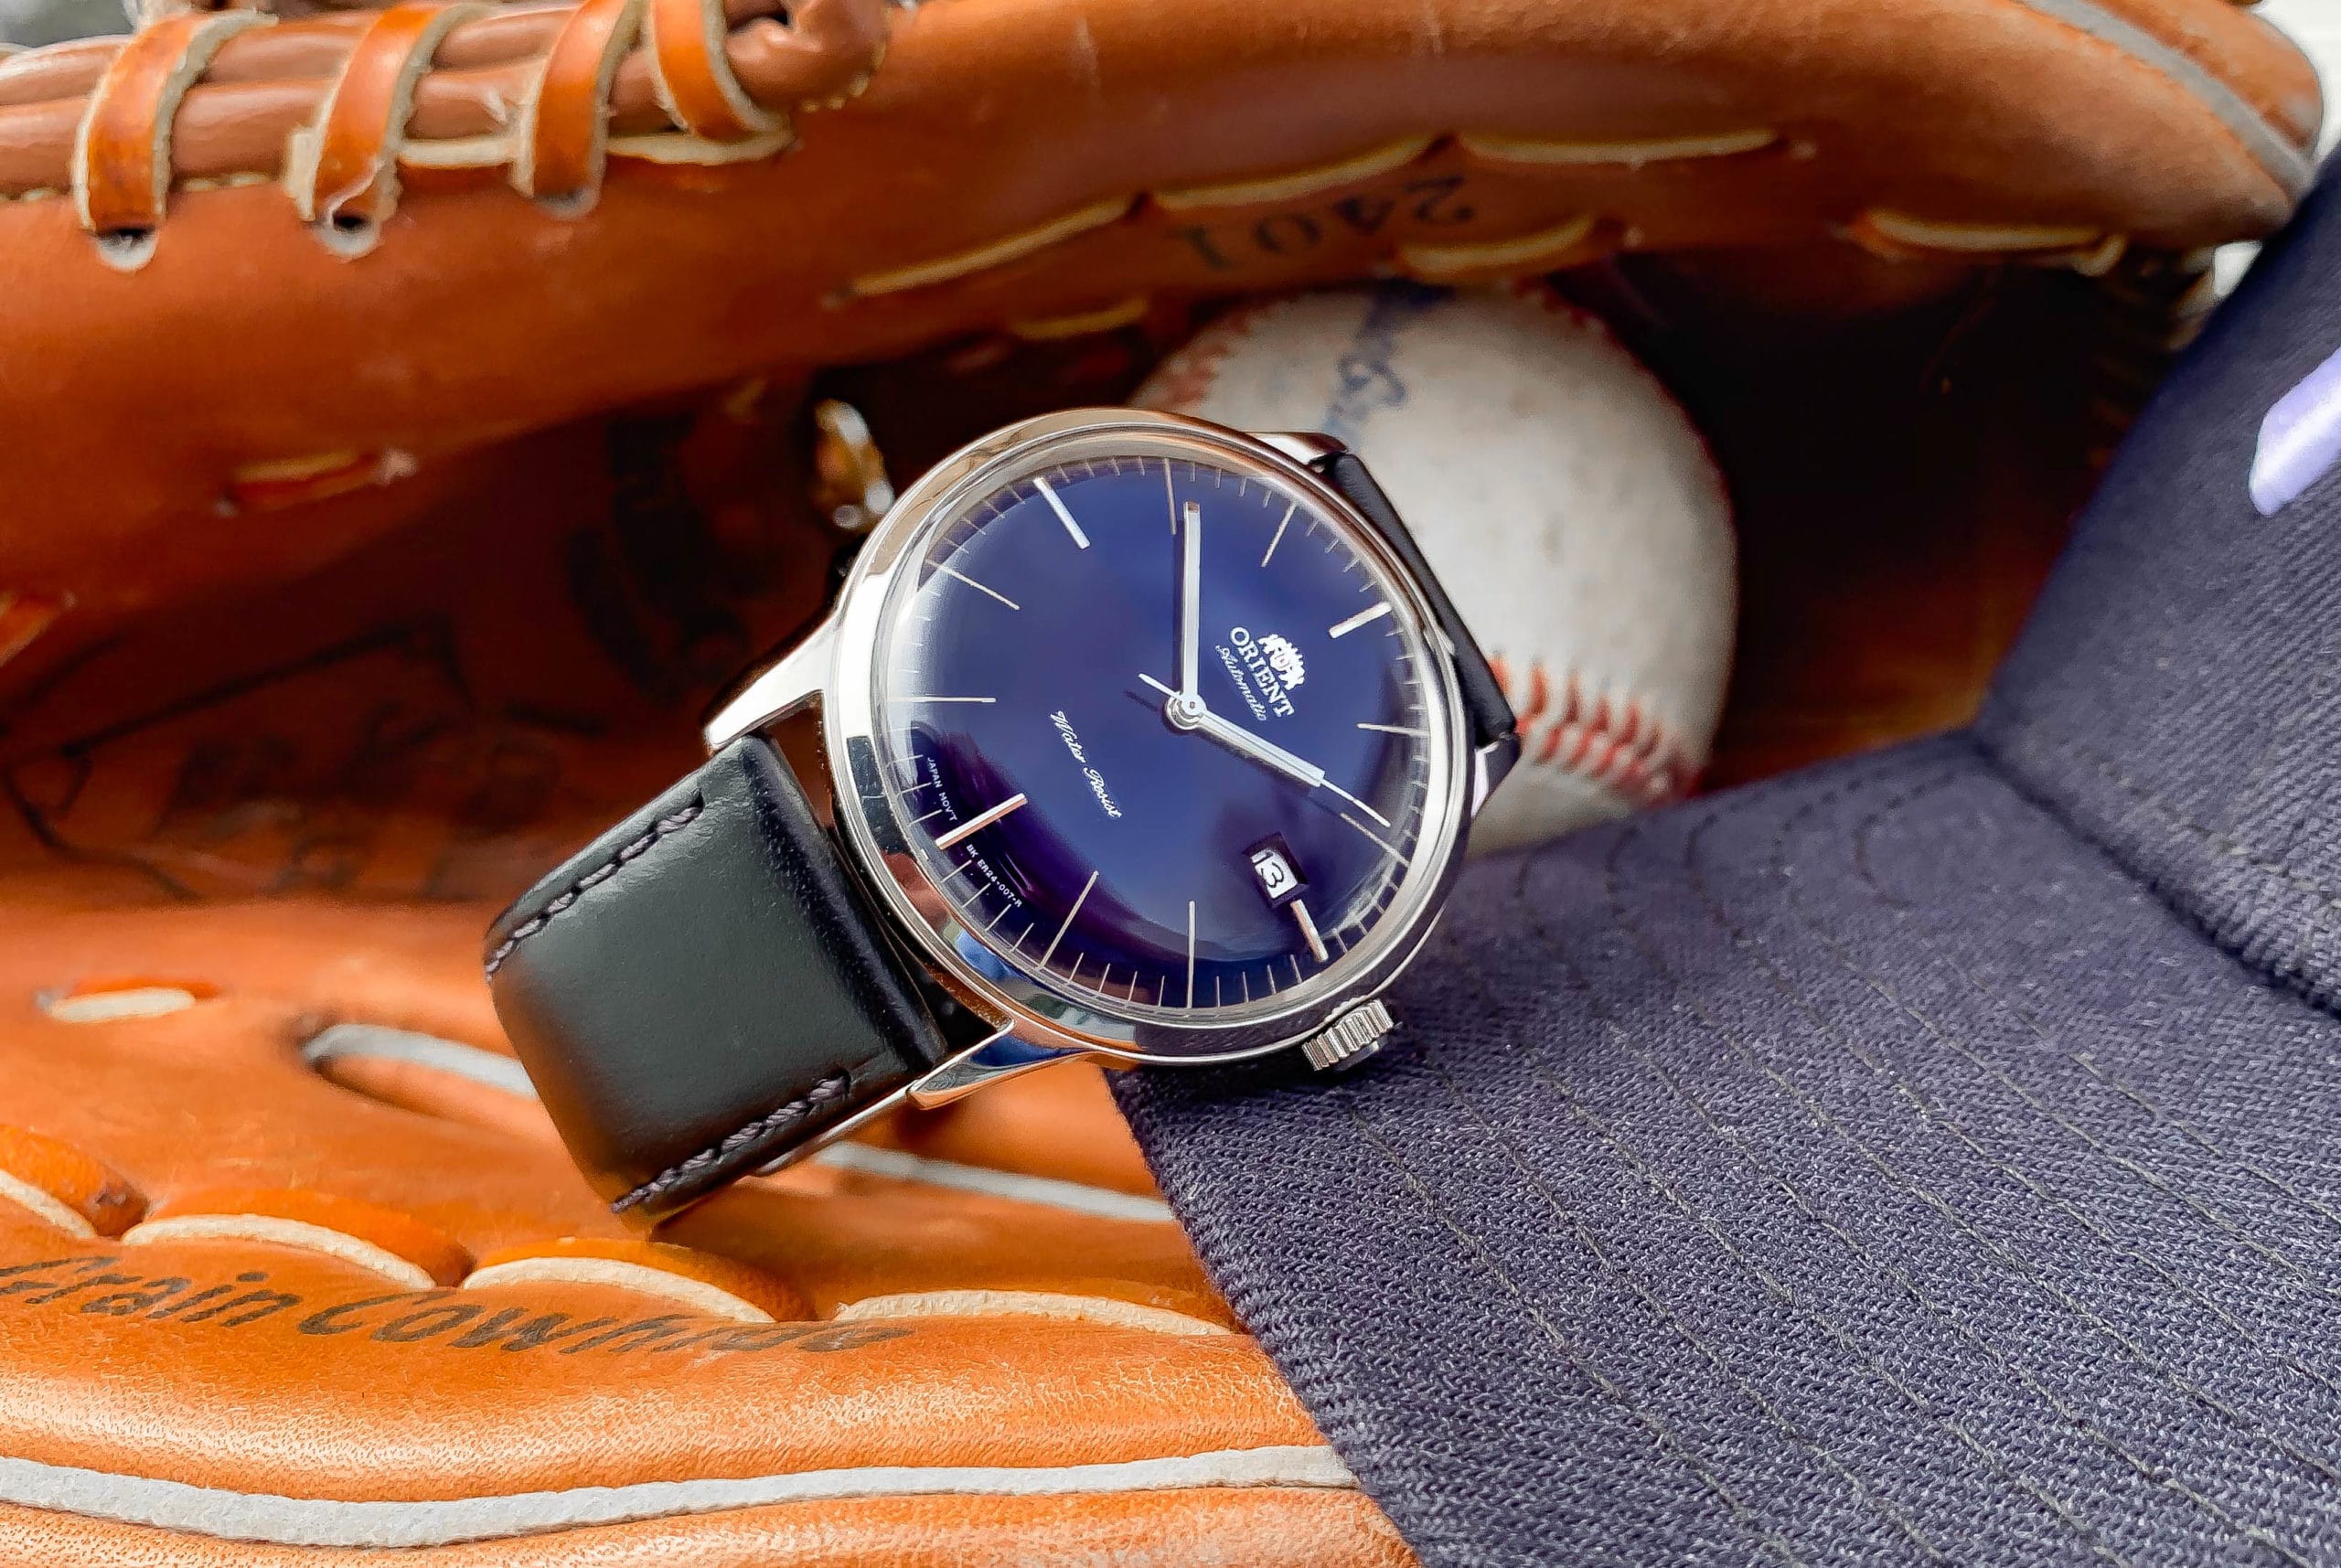 The Orient Bambino: The Perfect Affordable Dress Watch?